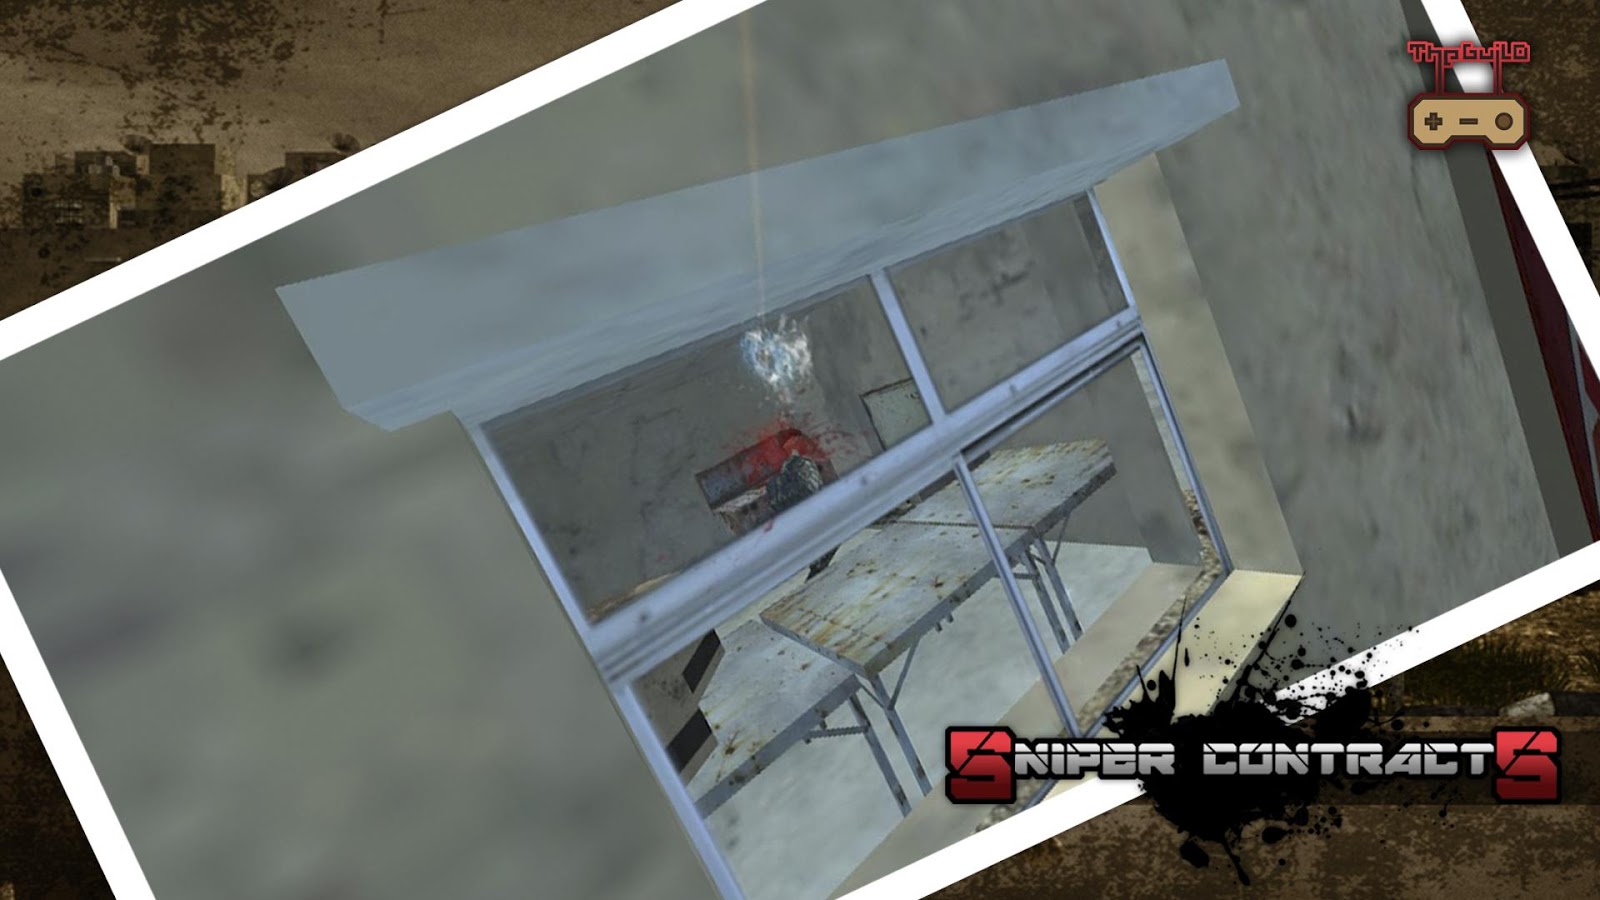 free download sniper contracts 3